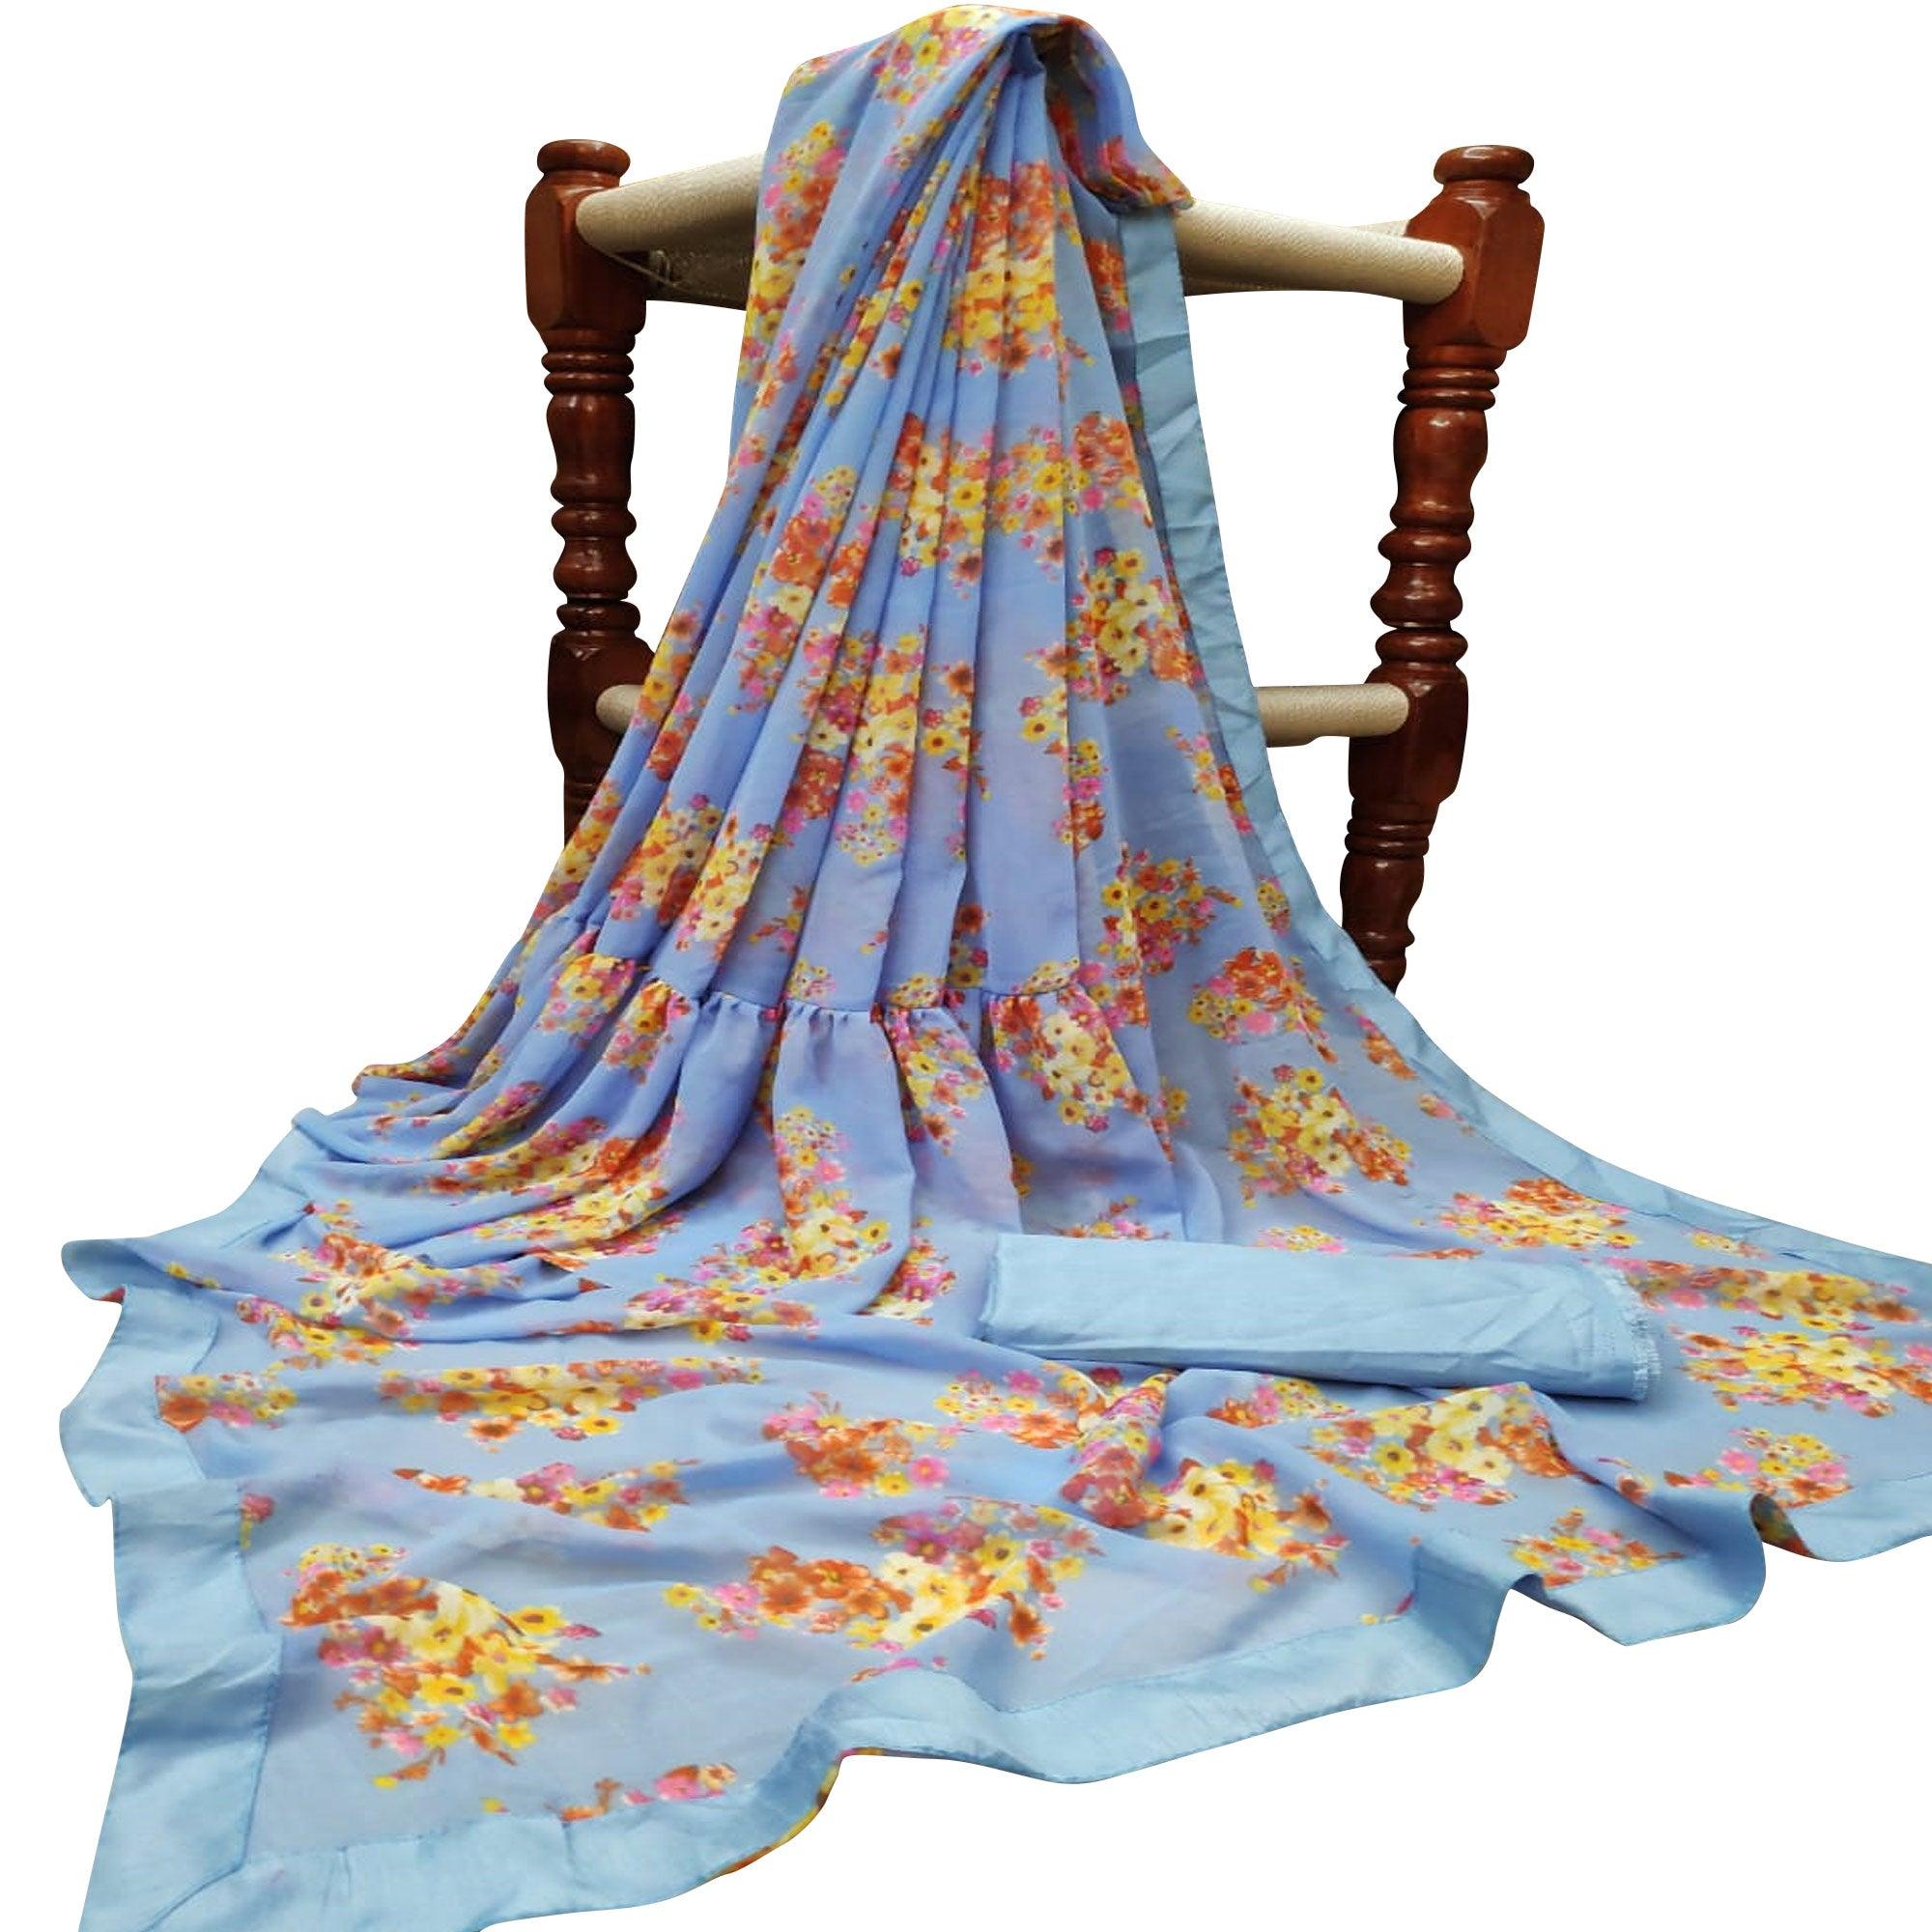 Majesty Blue Colored Partywear Printed Georgette Saree - Peachmode